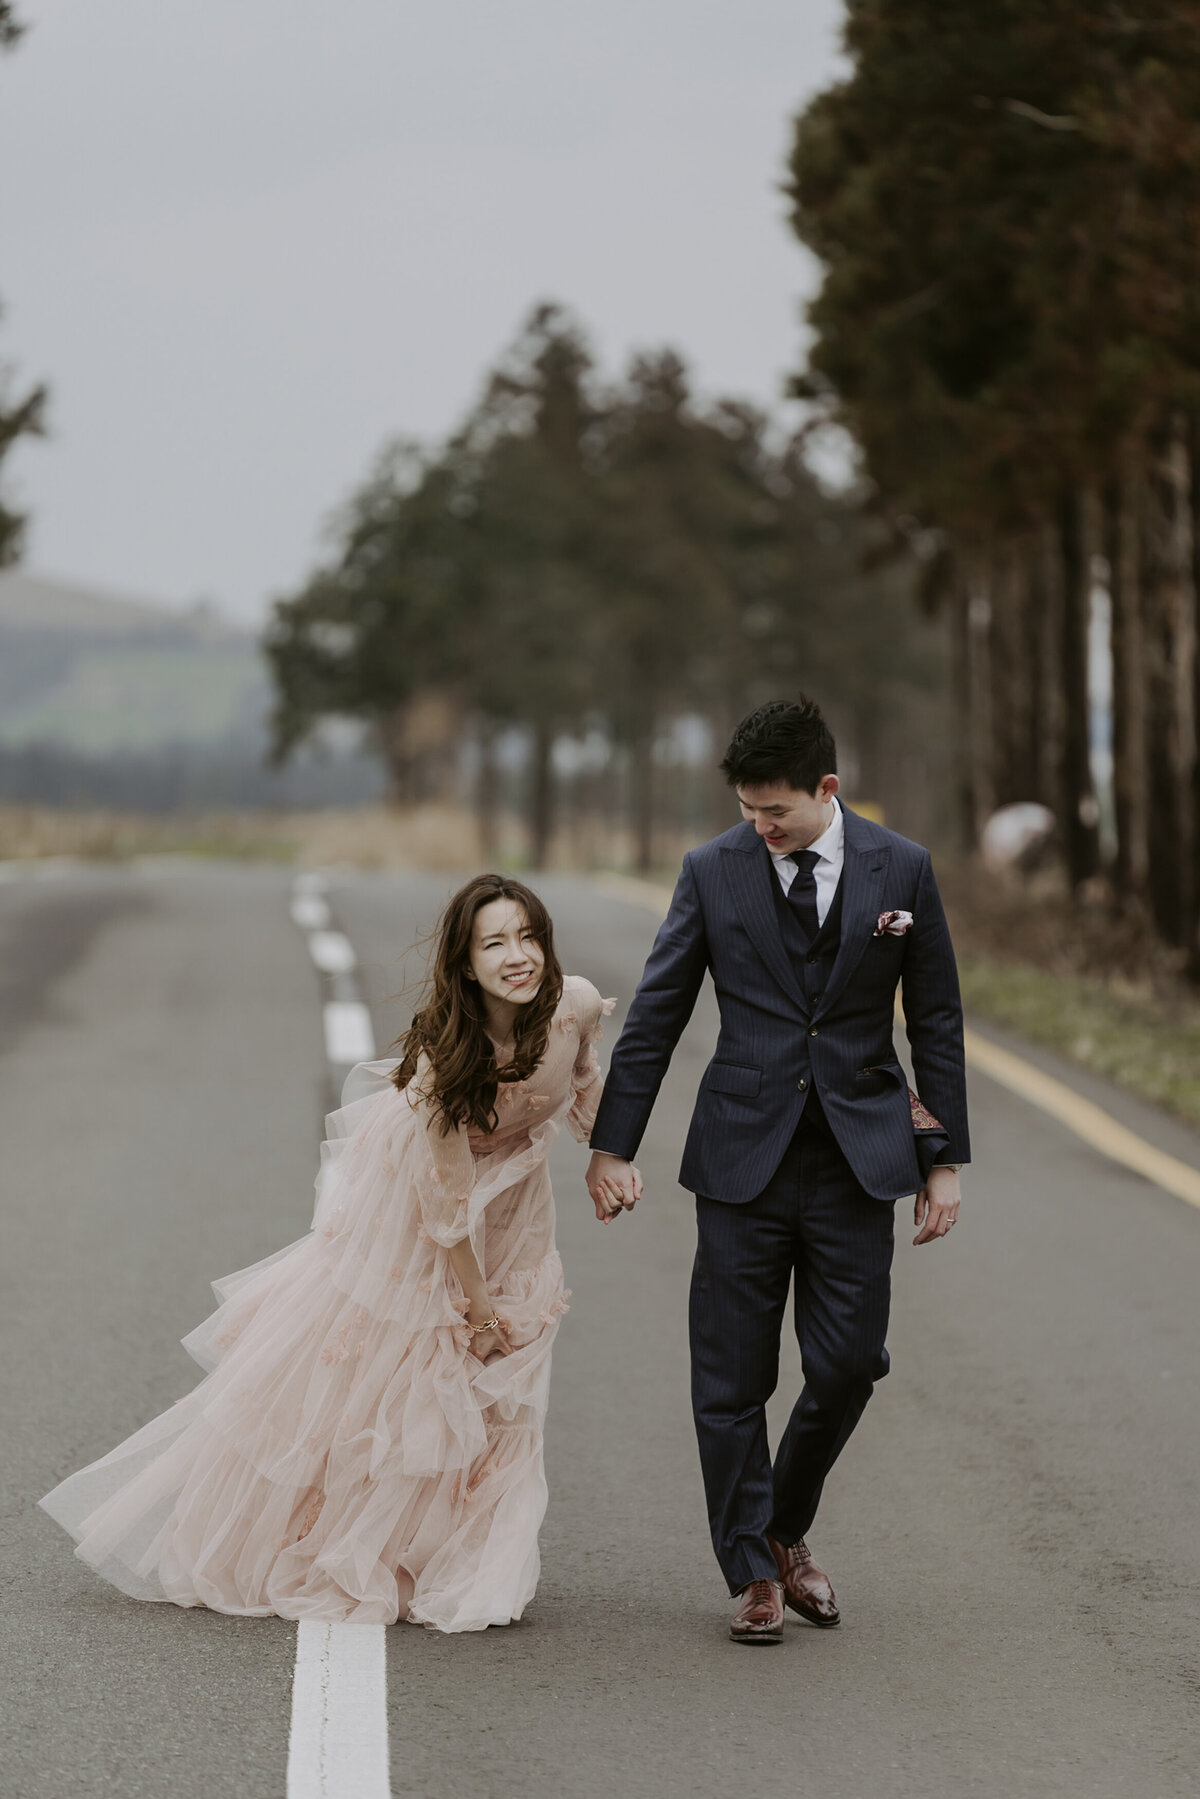 the bride wearing a raffled pink dress while the groom is wearing a black suit and tie while walking in the road of jeju island